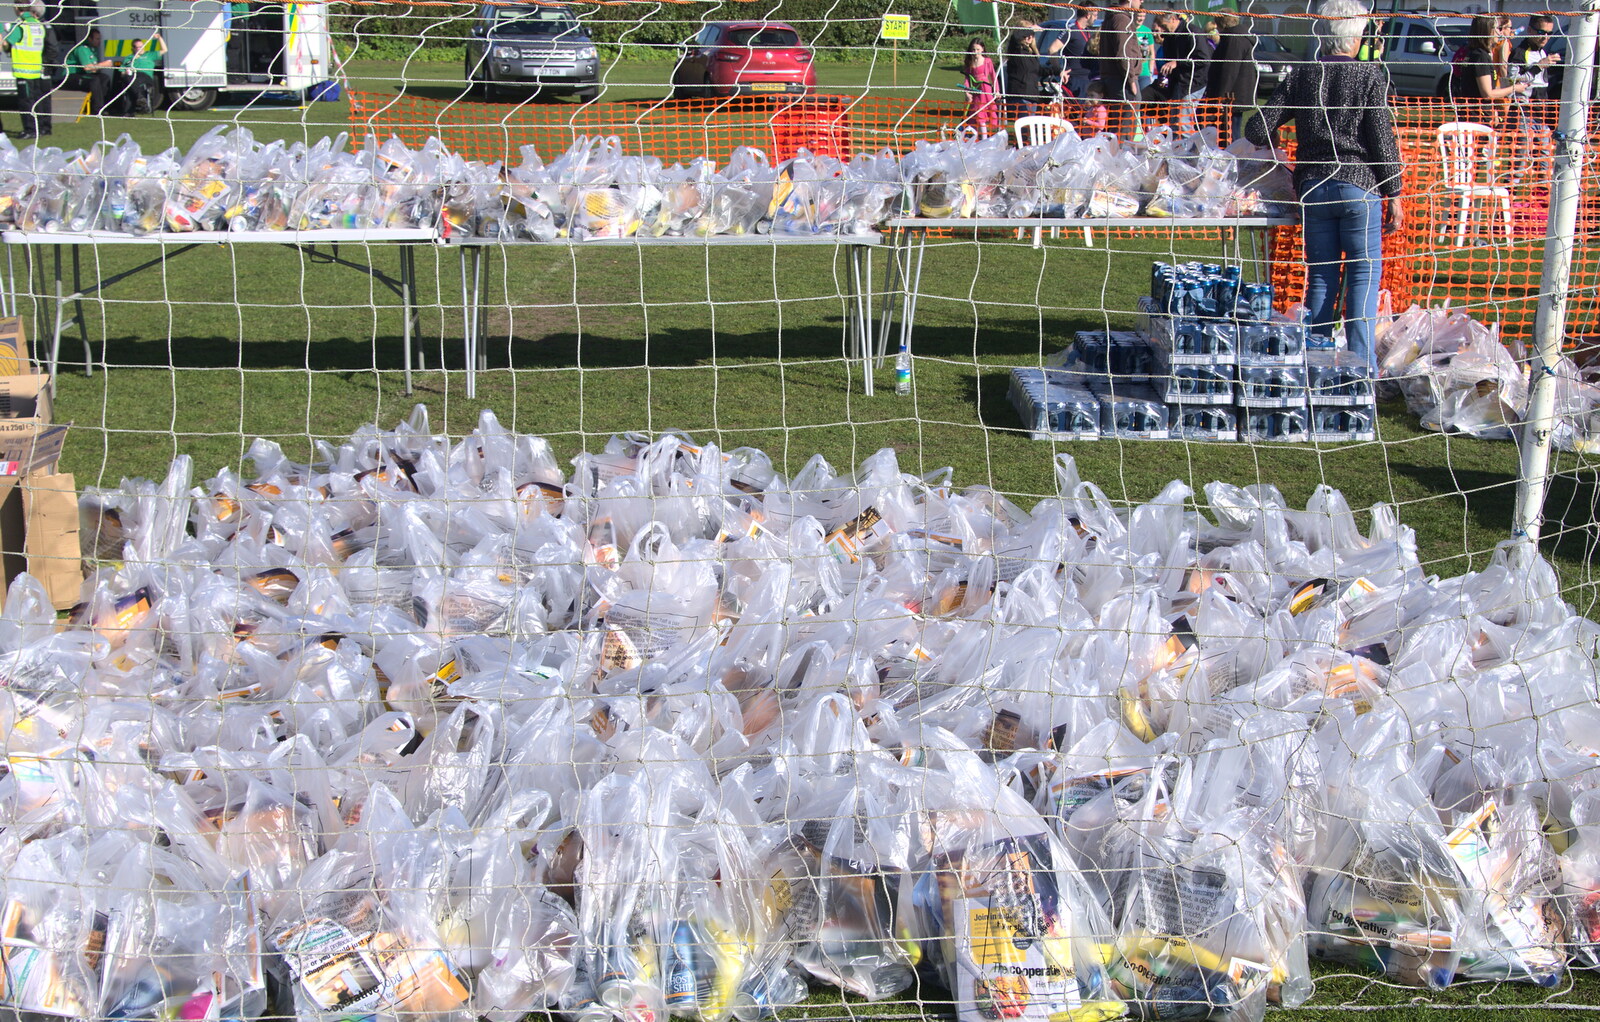 A million plastic bags from The Black Dog Festival of Running, Bungay, Suffolk - 2nd April 2017